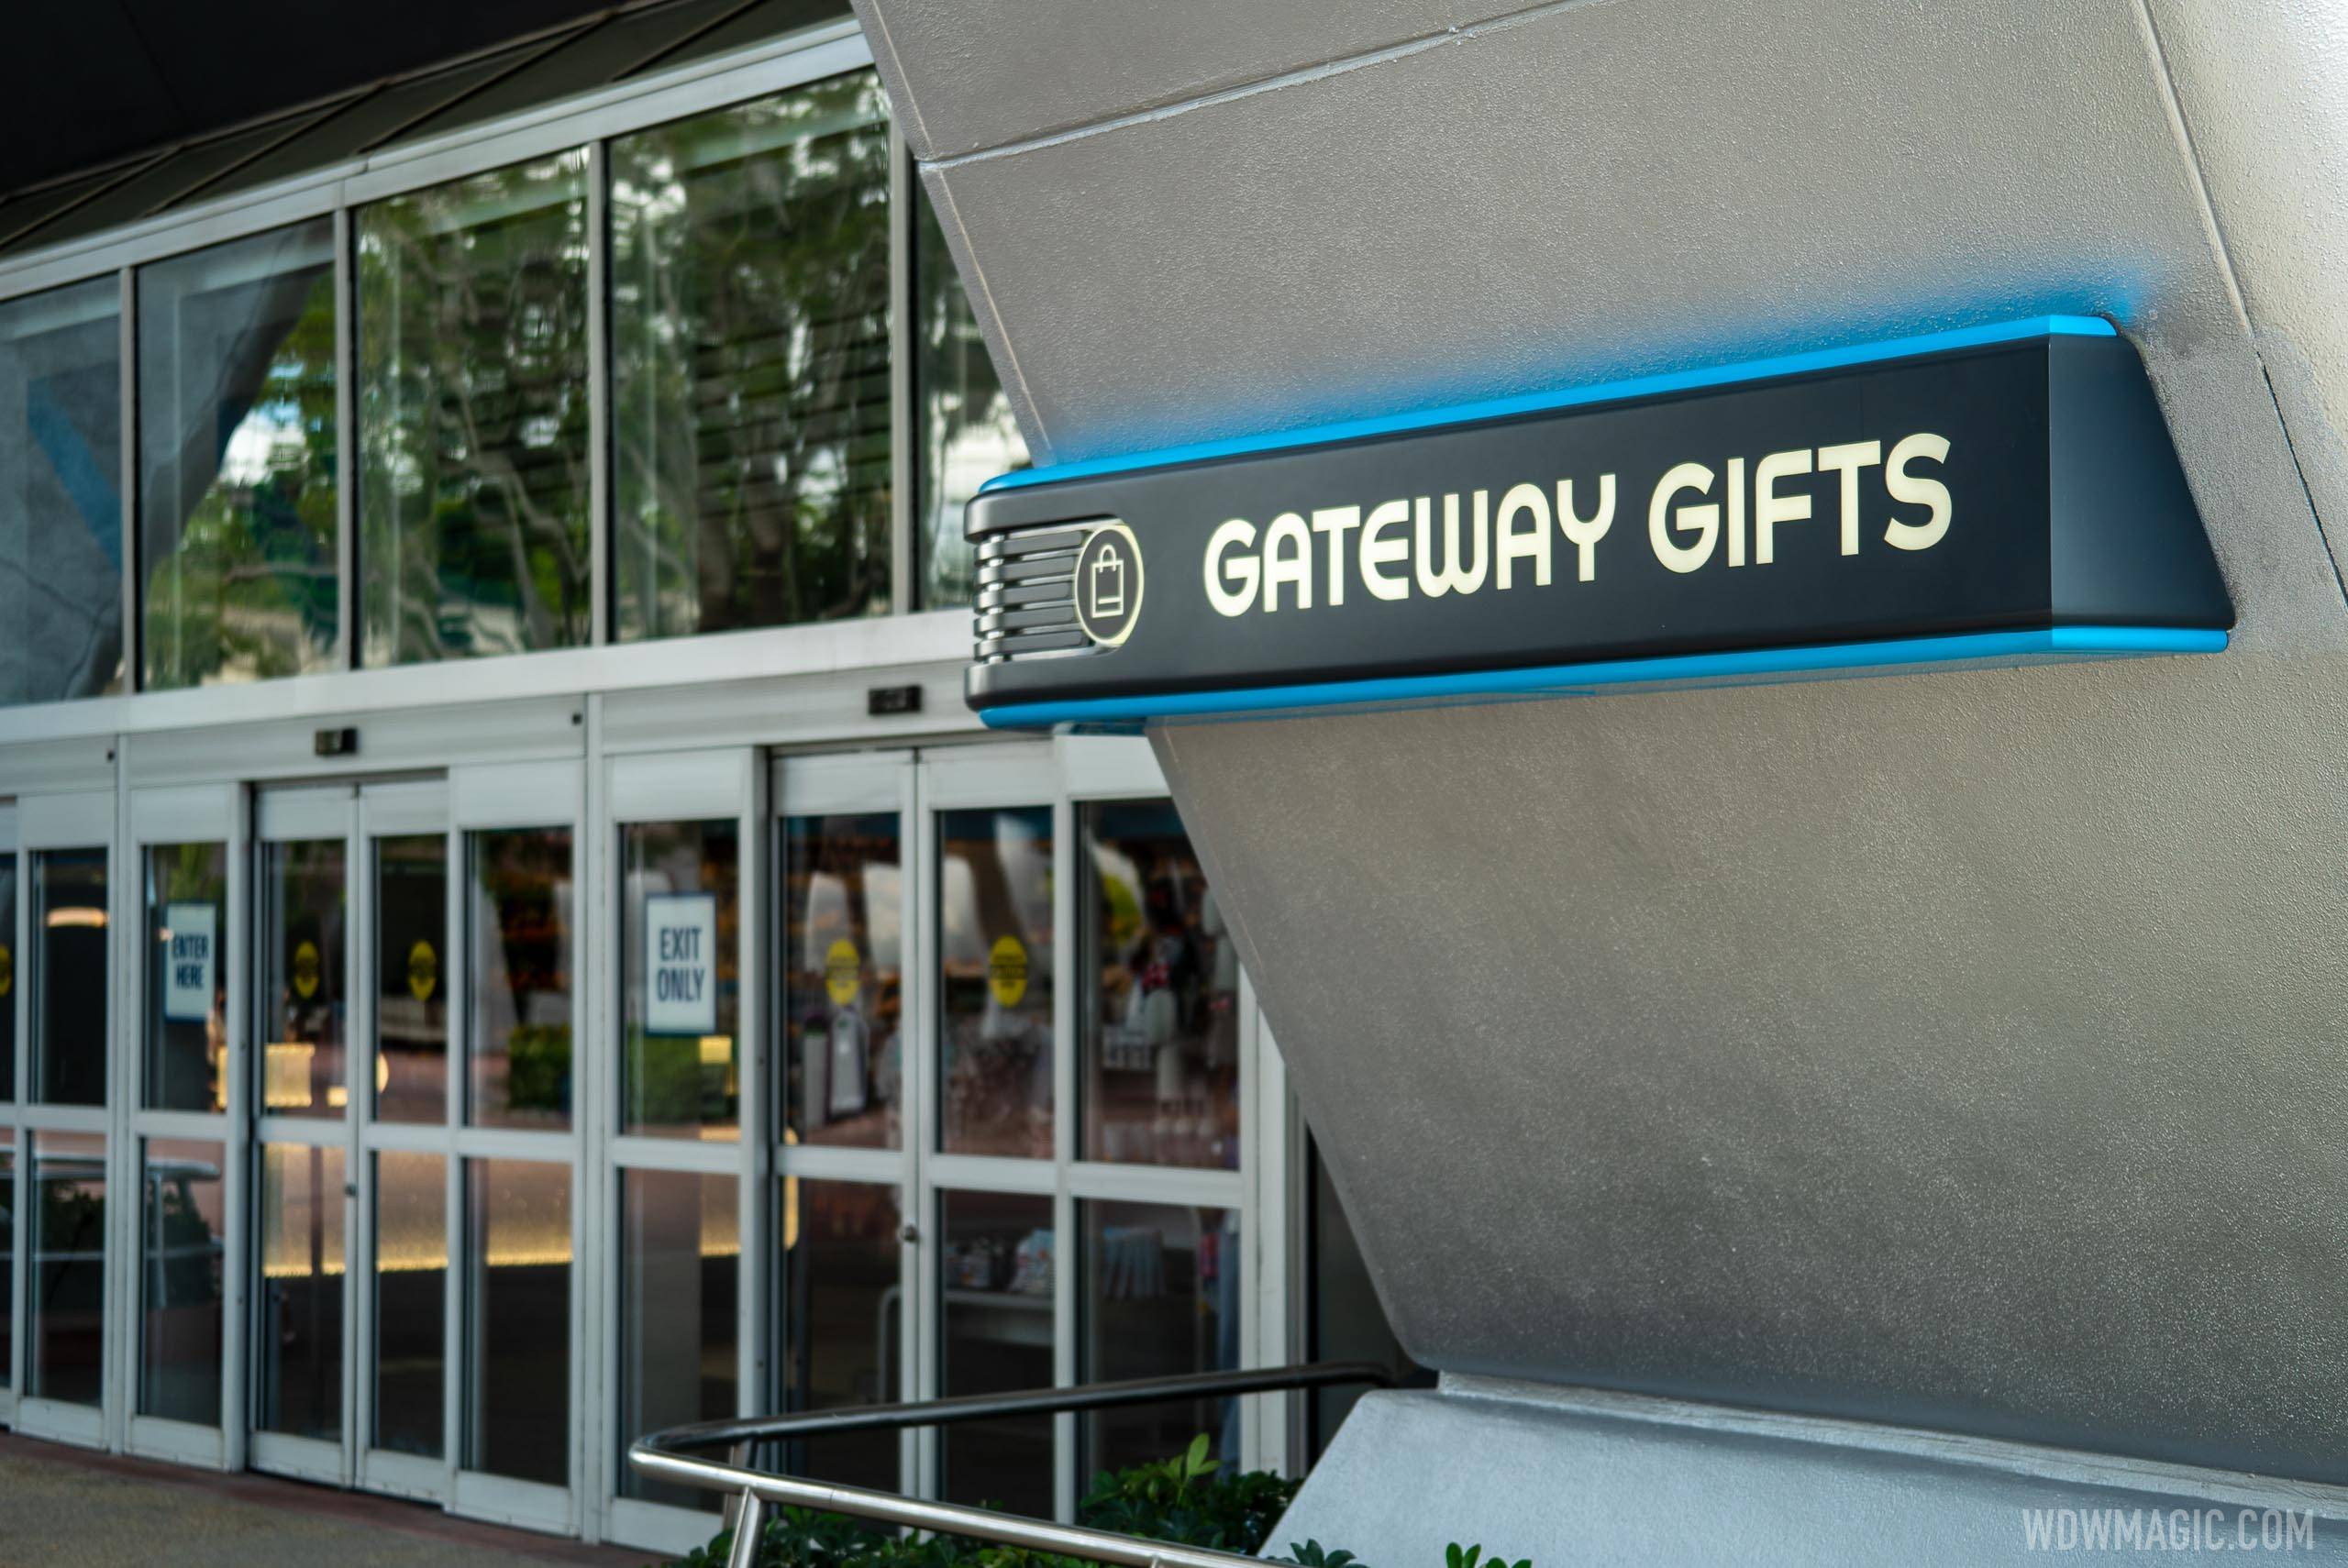 New signage at Gateway Gifts